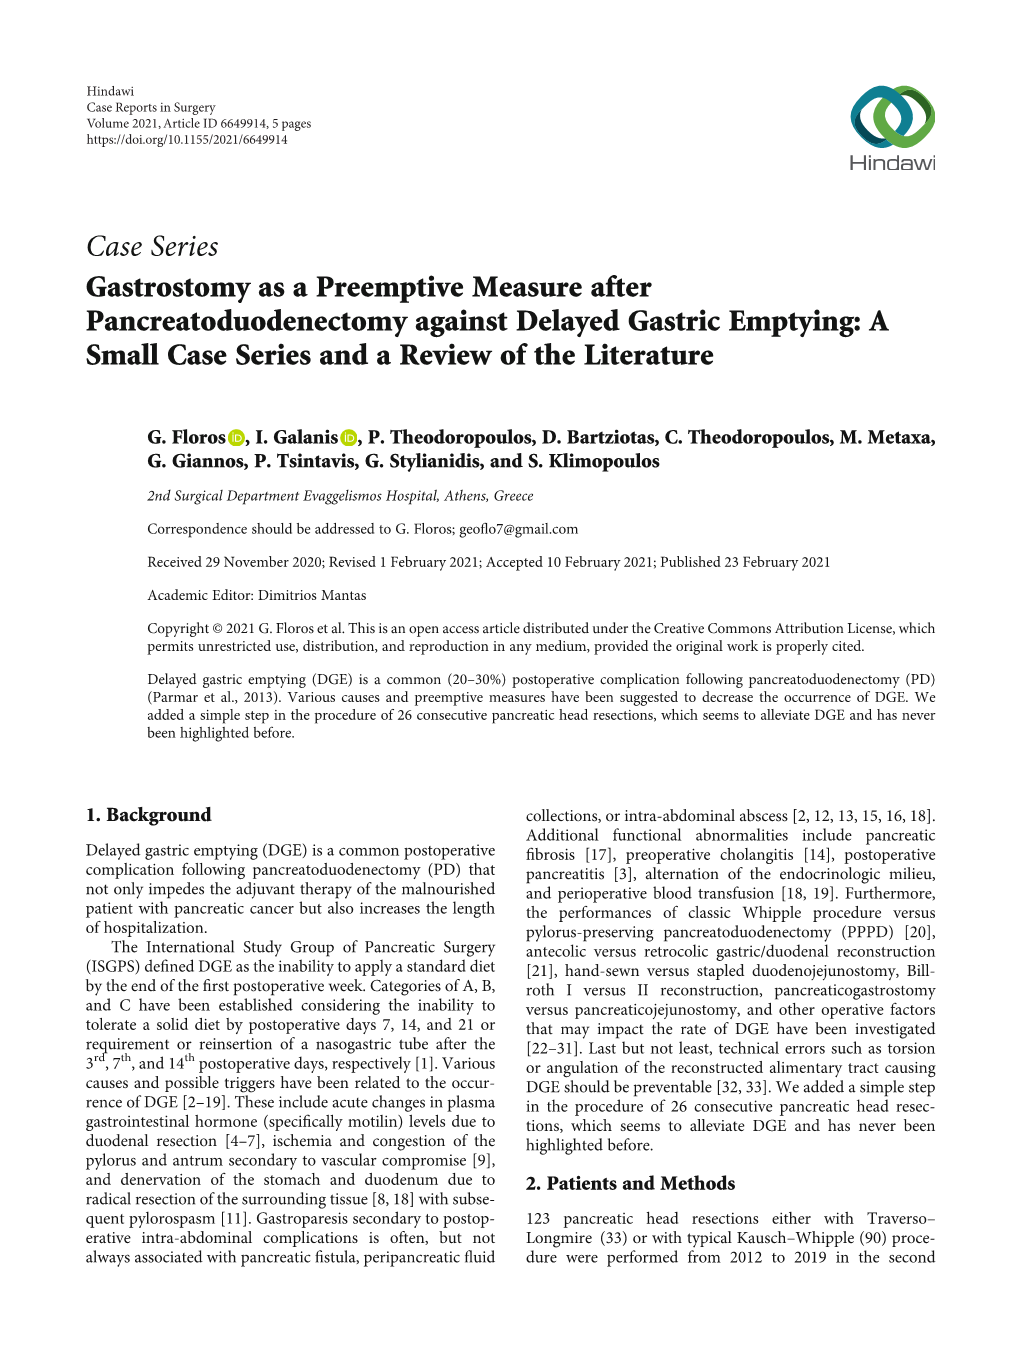 Case Series Gastrostomy As a Preemptive Measure After Pancreatoduodenectomy Against Delayed Gastric Emptying: a Small Case Series and a Review of the Literature